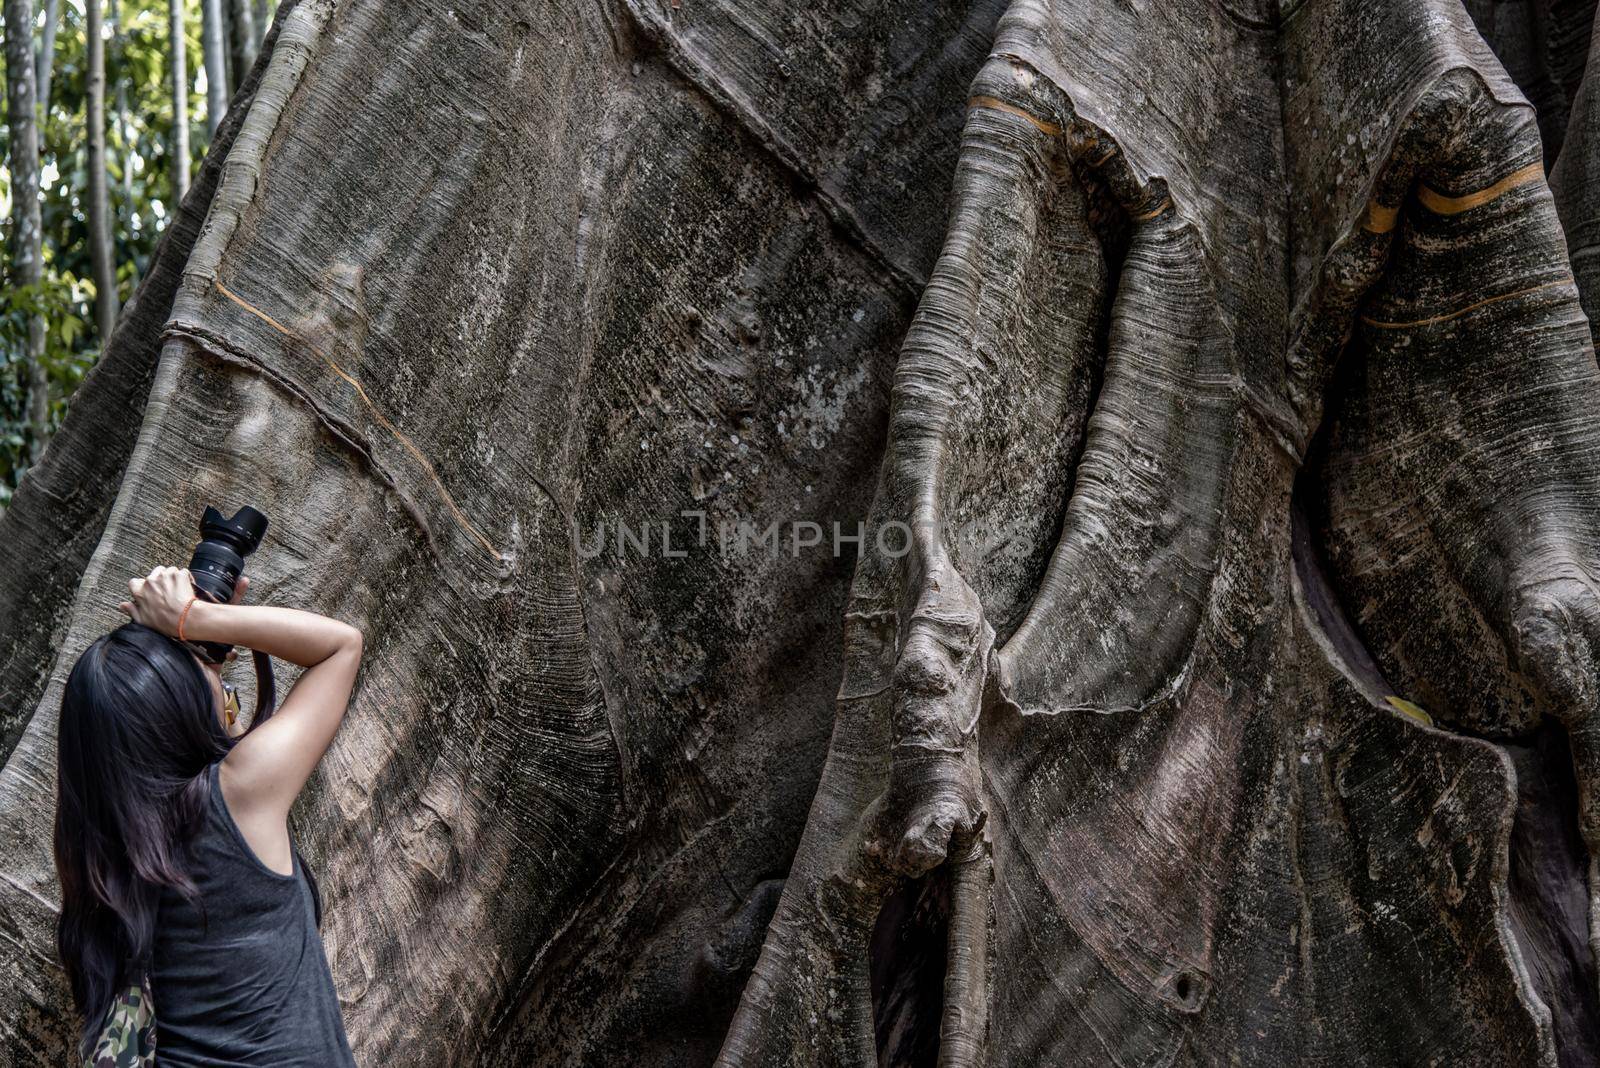 Young woman with Shoulder bag and using a camera to take photo Giant big tree, Size comparison between human and giant big tree in Ban Sanam of Uthai Thani Province, Thailand, nature background.